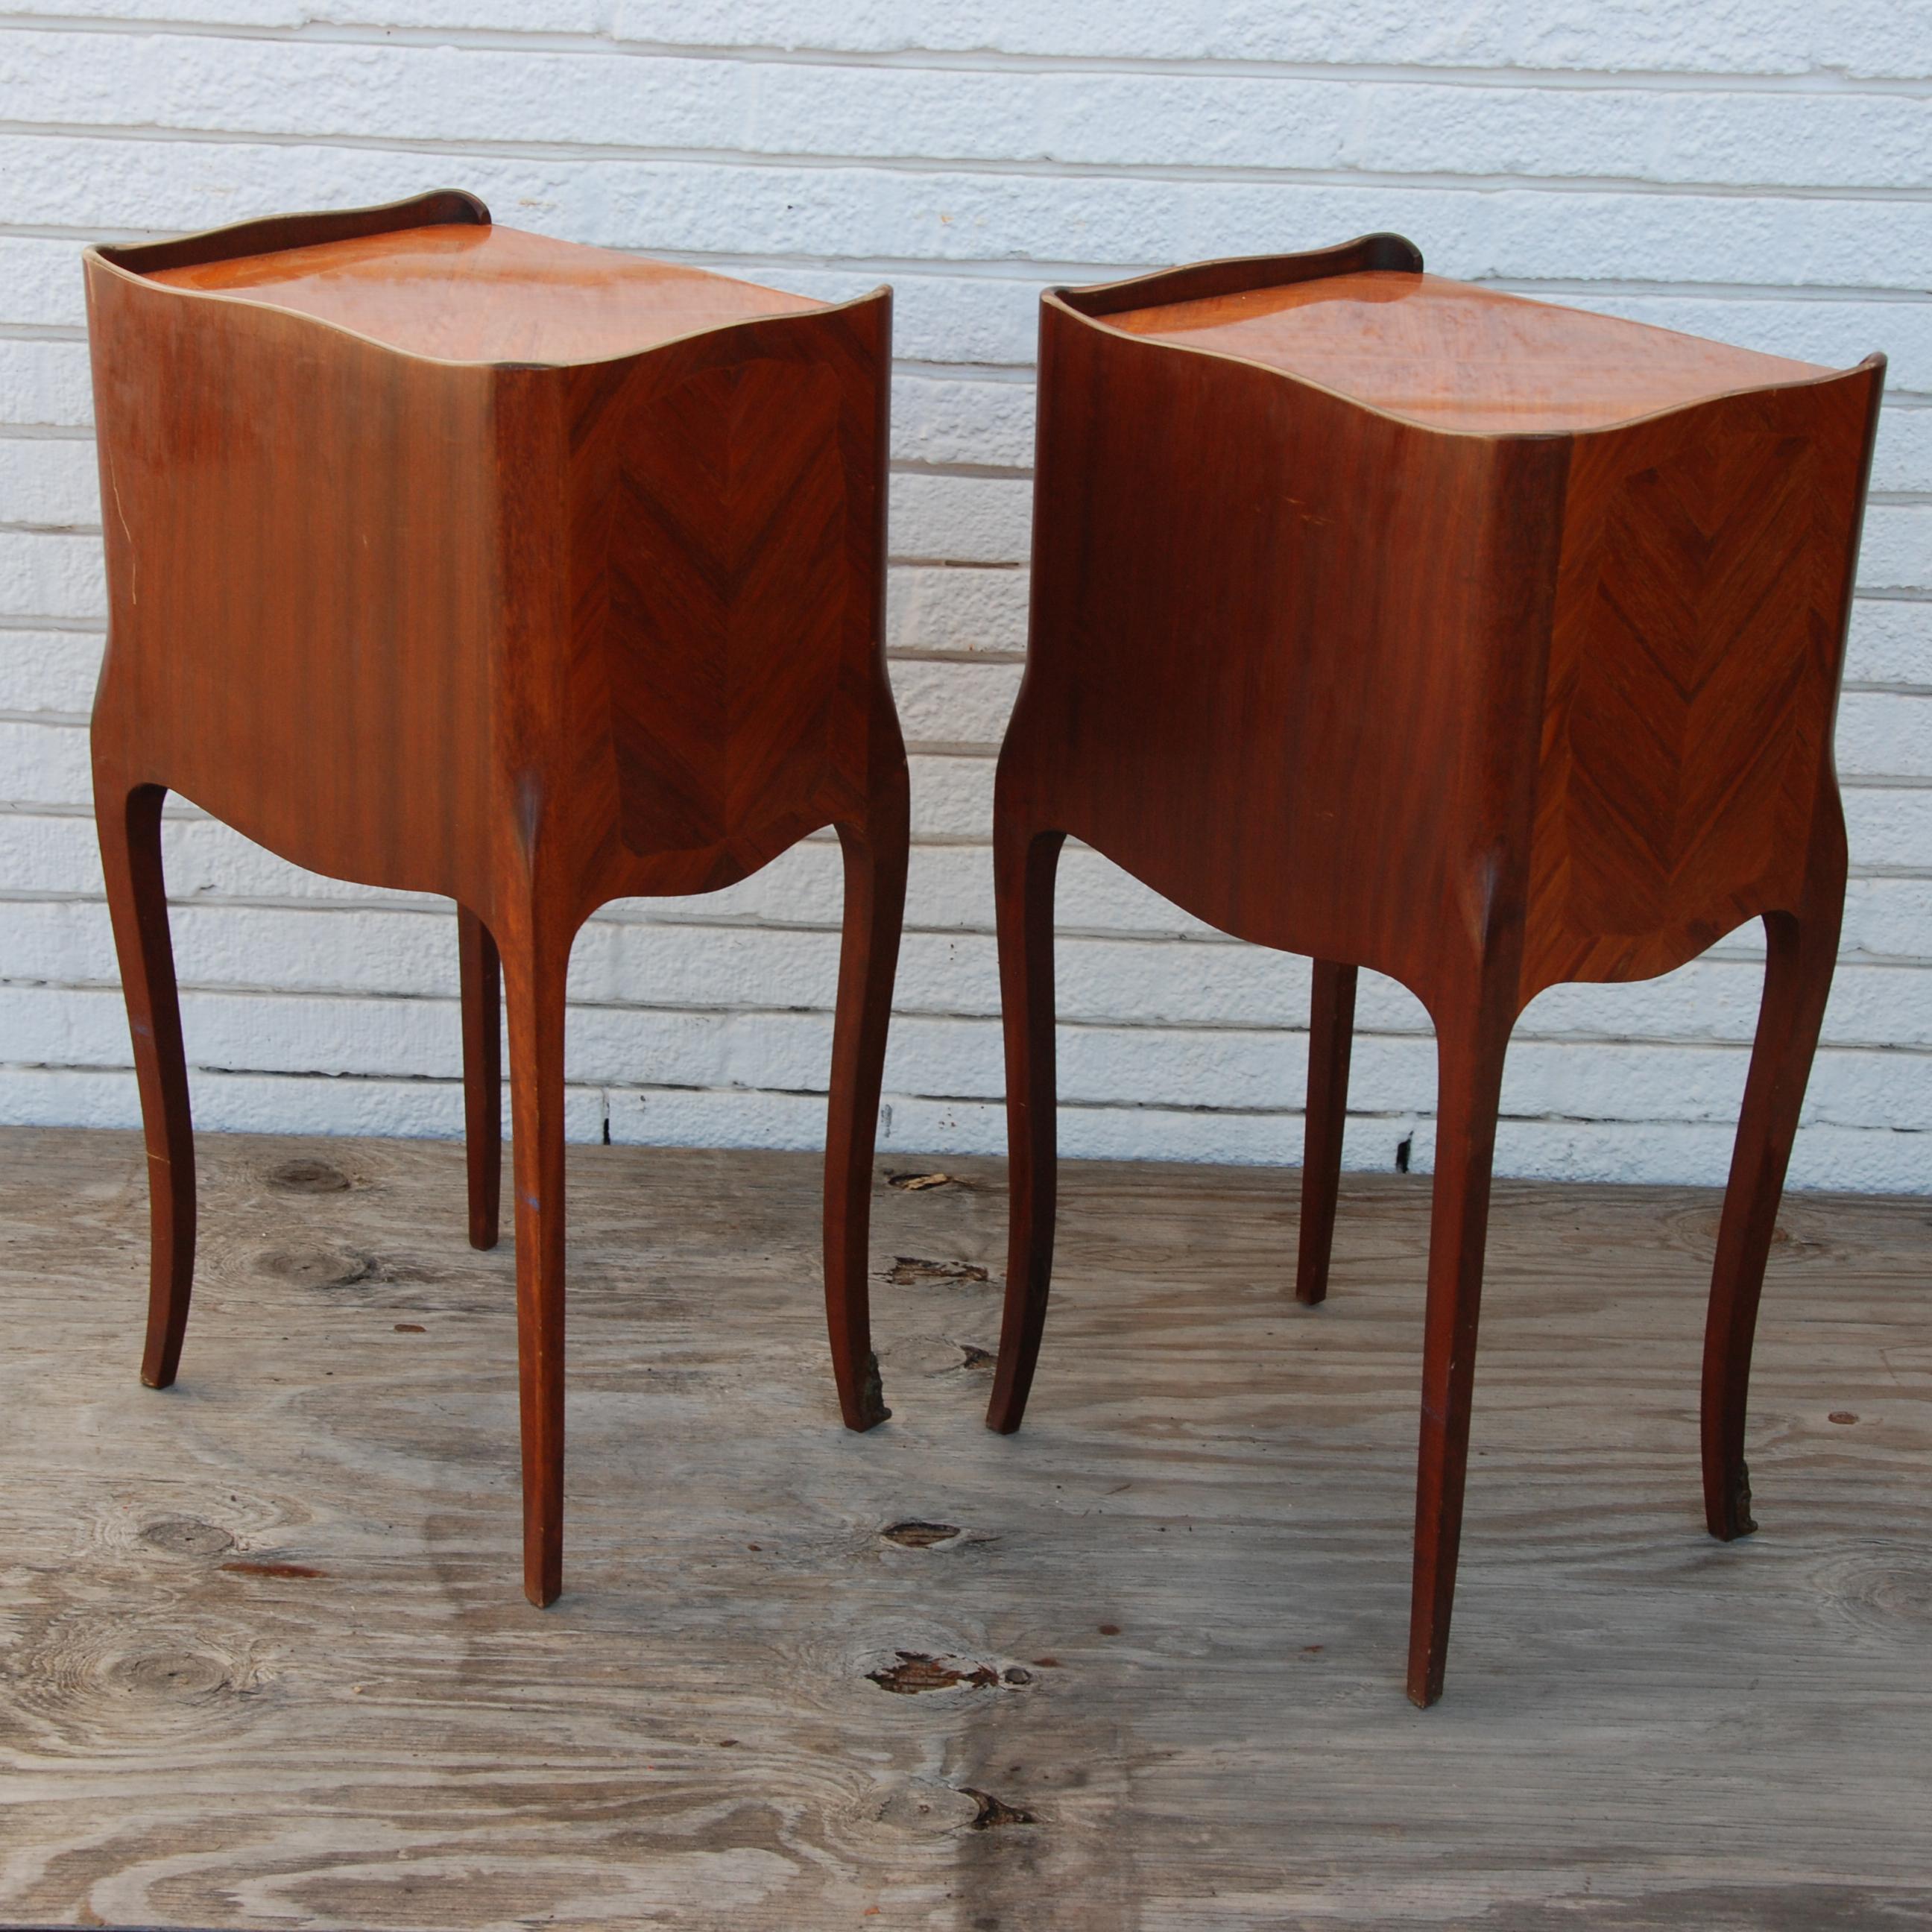 20th Century Pair of Traditional Mahogany Nightstands with Marquetry and Queen Anne Legs